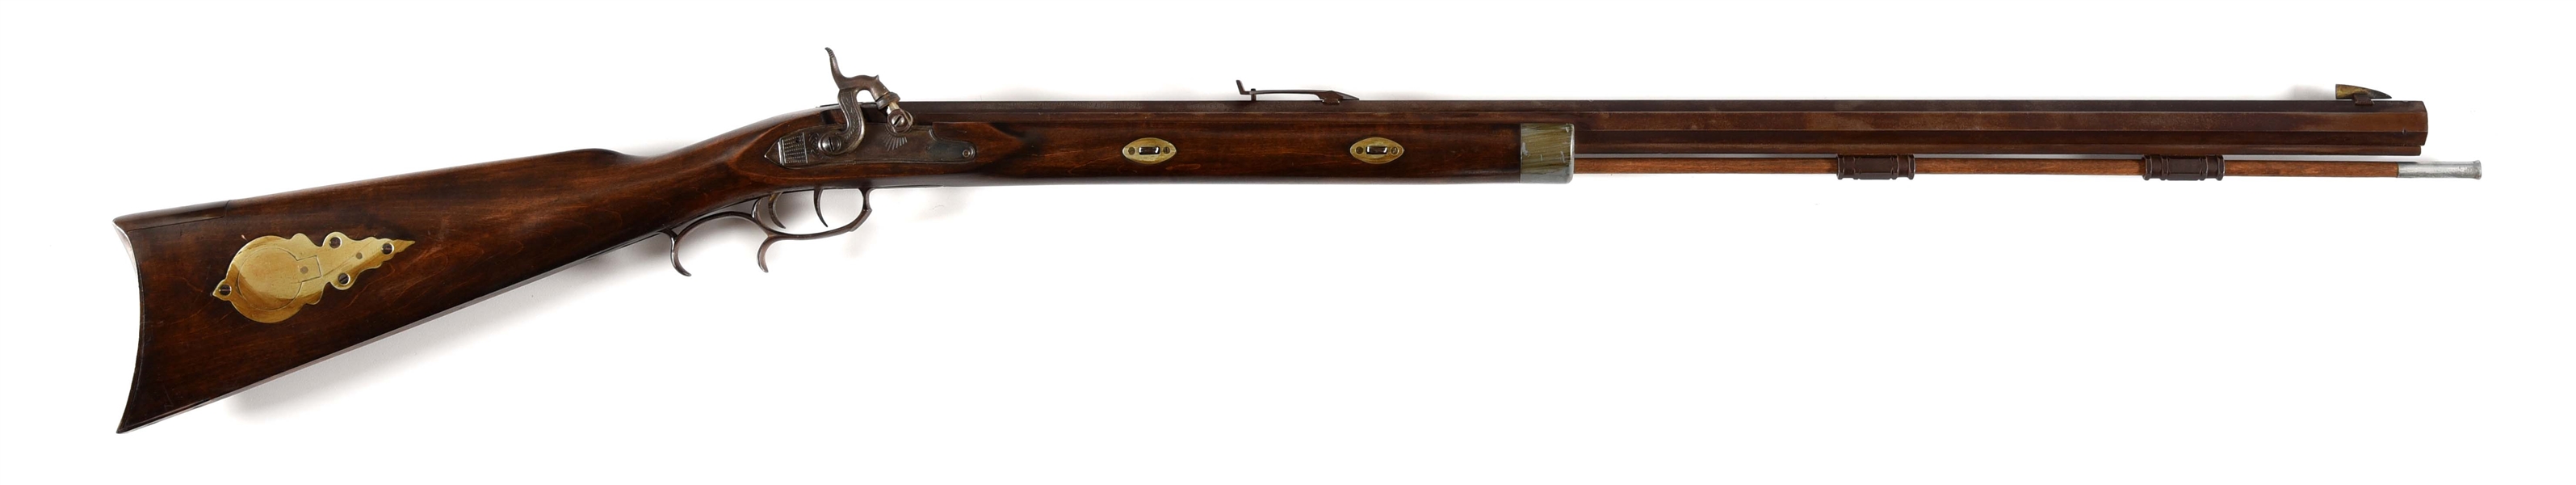 (A) CONNECTICUT VALLEY ARMS PERCUSSION PLAINS RIFLE.